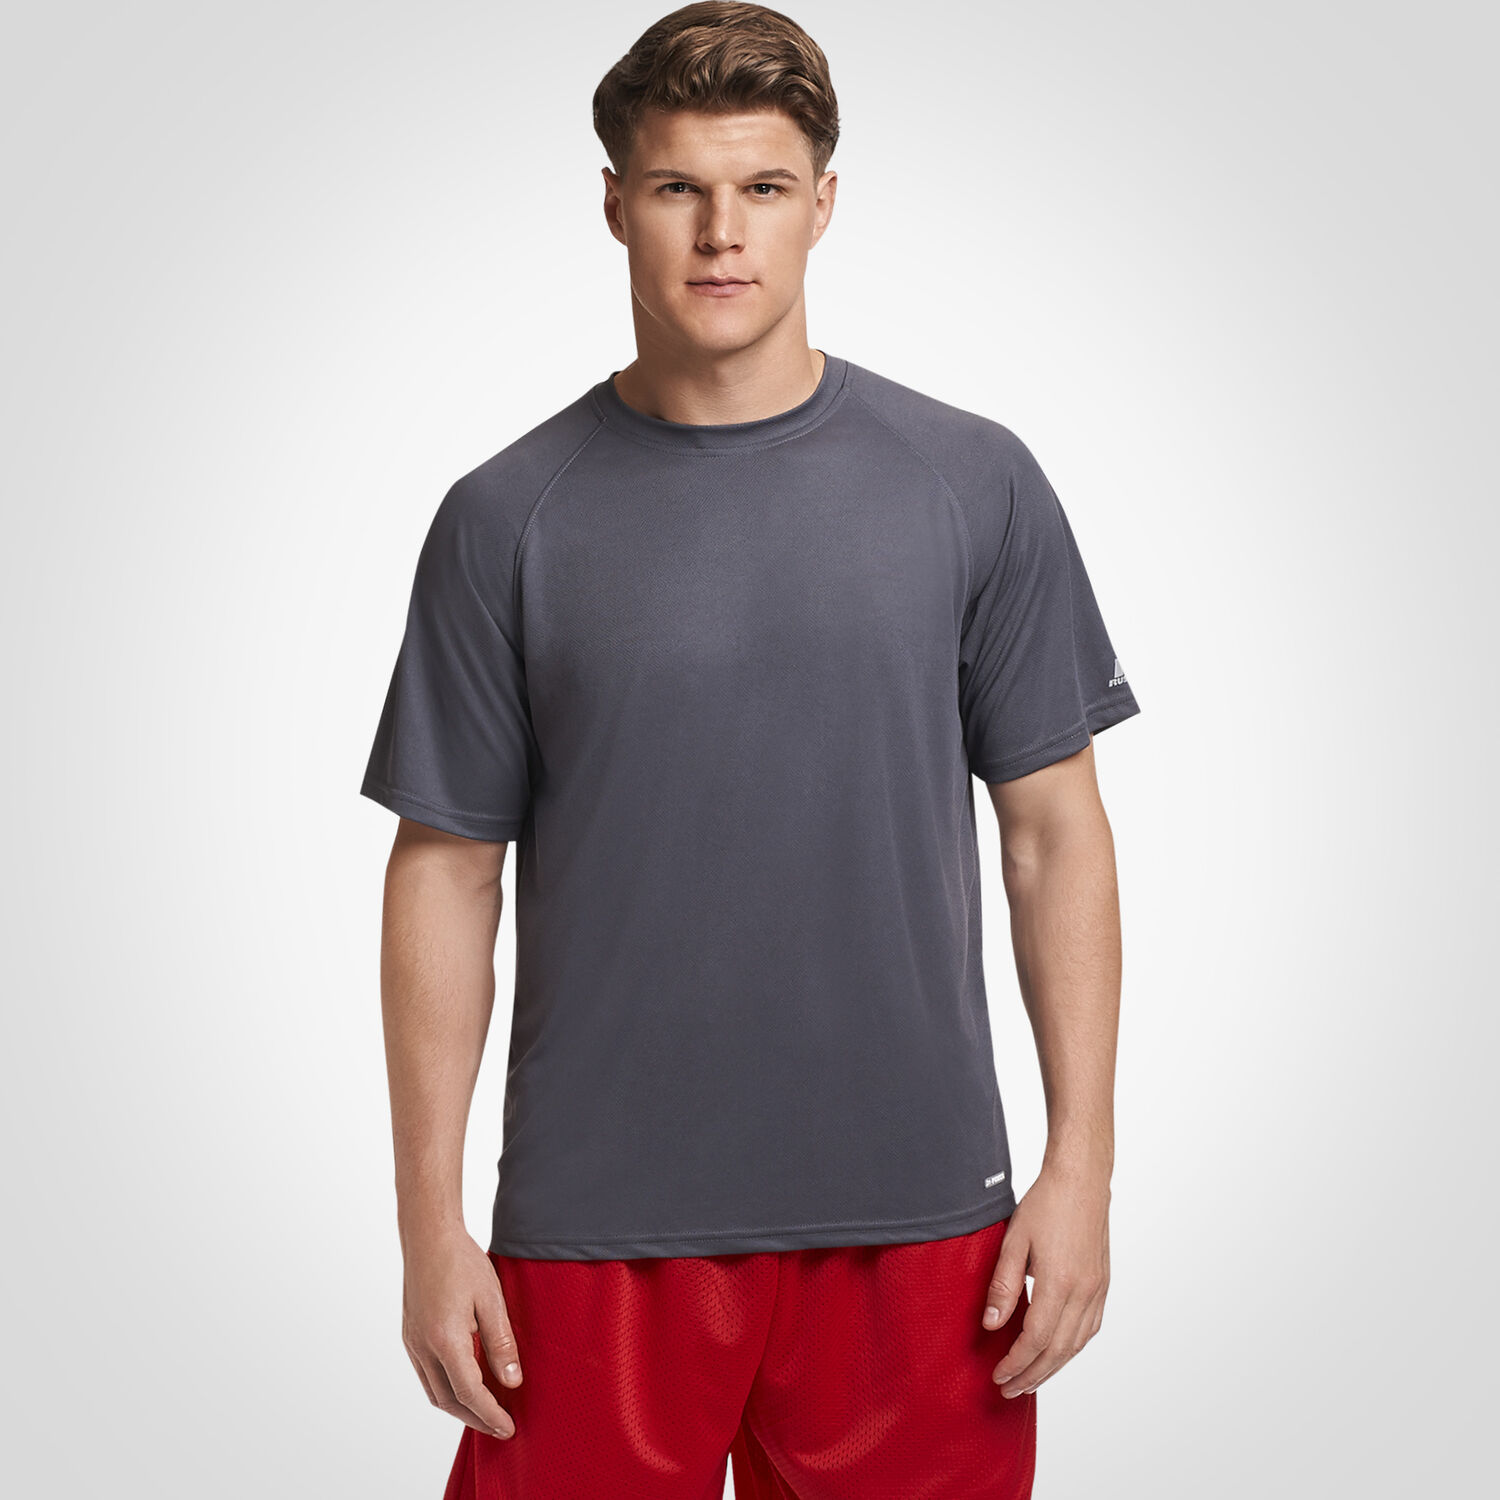 Men's Dri-Power® Mesh Performance T-Shirt - Russell US | Russell Athletic